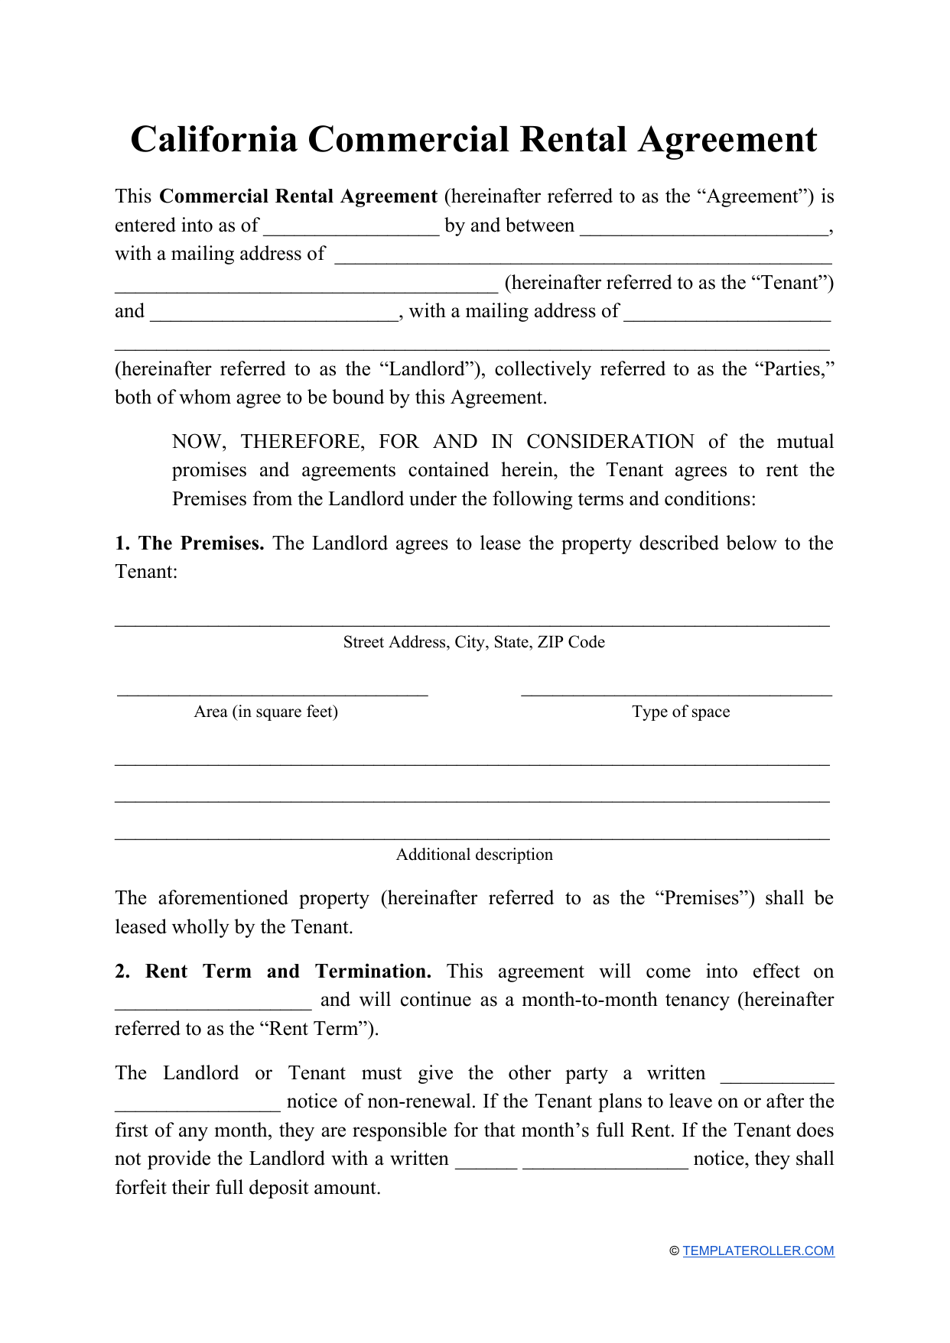 Commercial Rental Agreement Template - California, Page 1